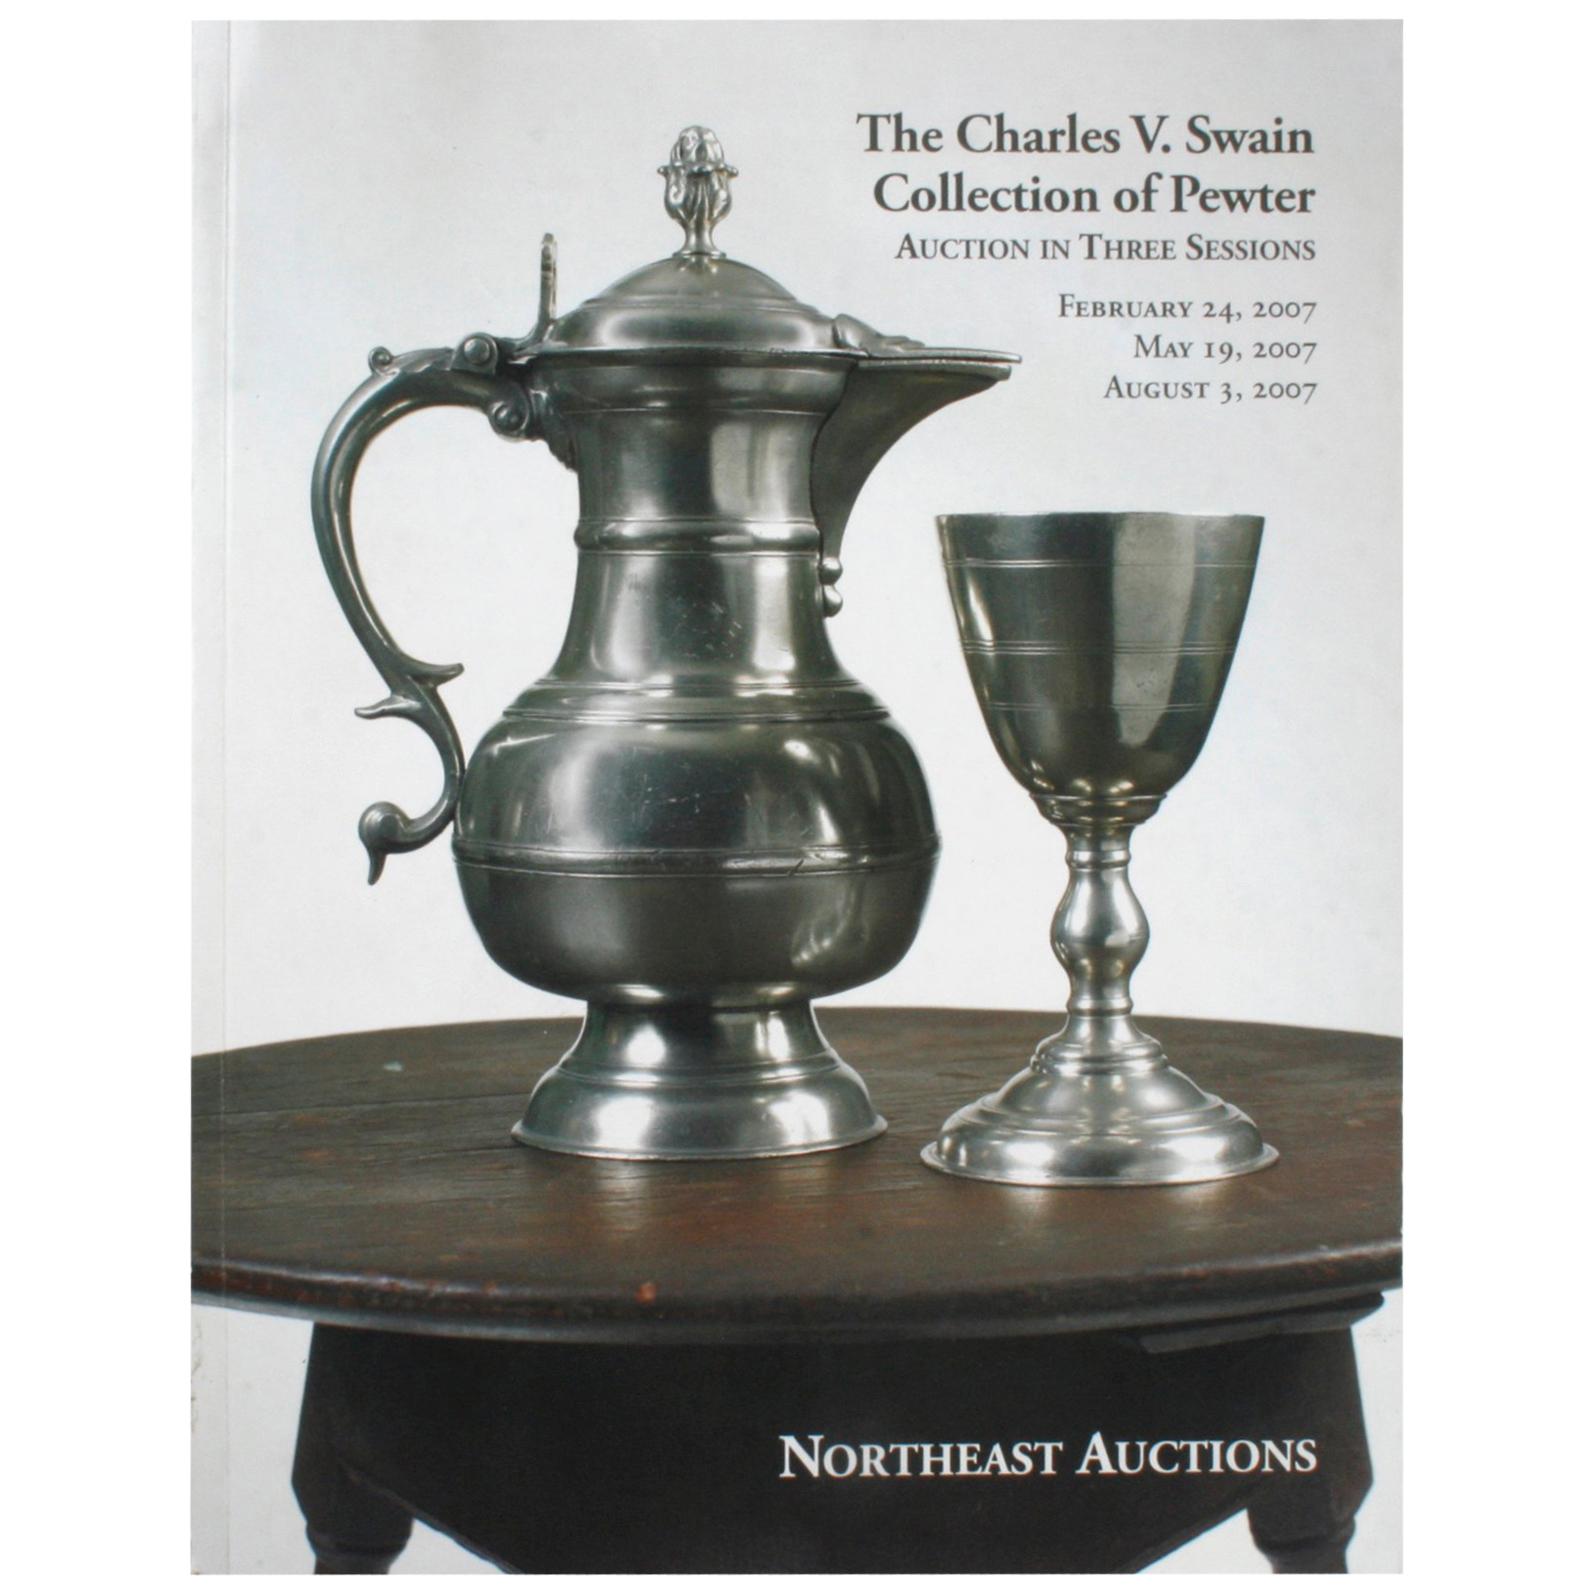 Northeast Auctions, The Charles V. Swain Collection of Pewter